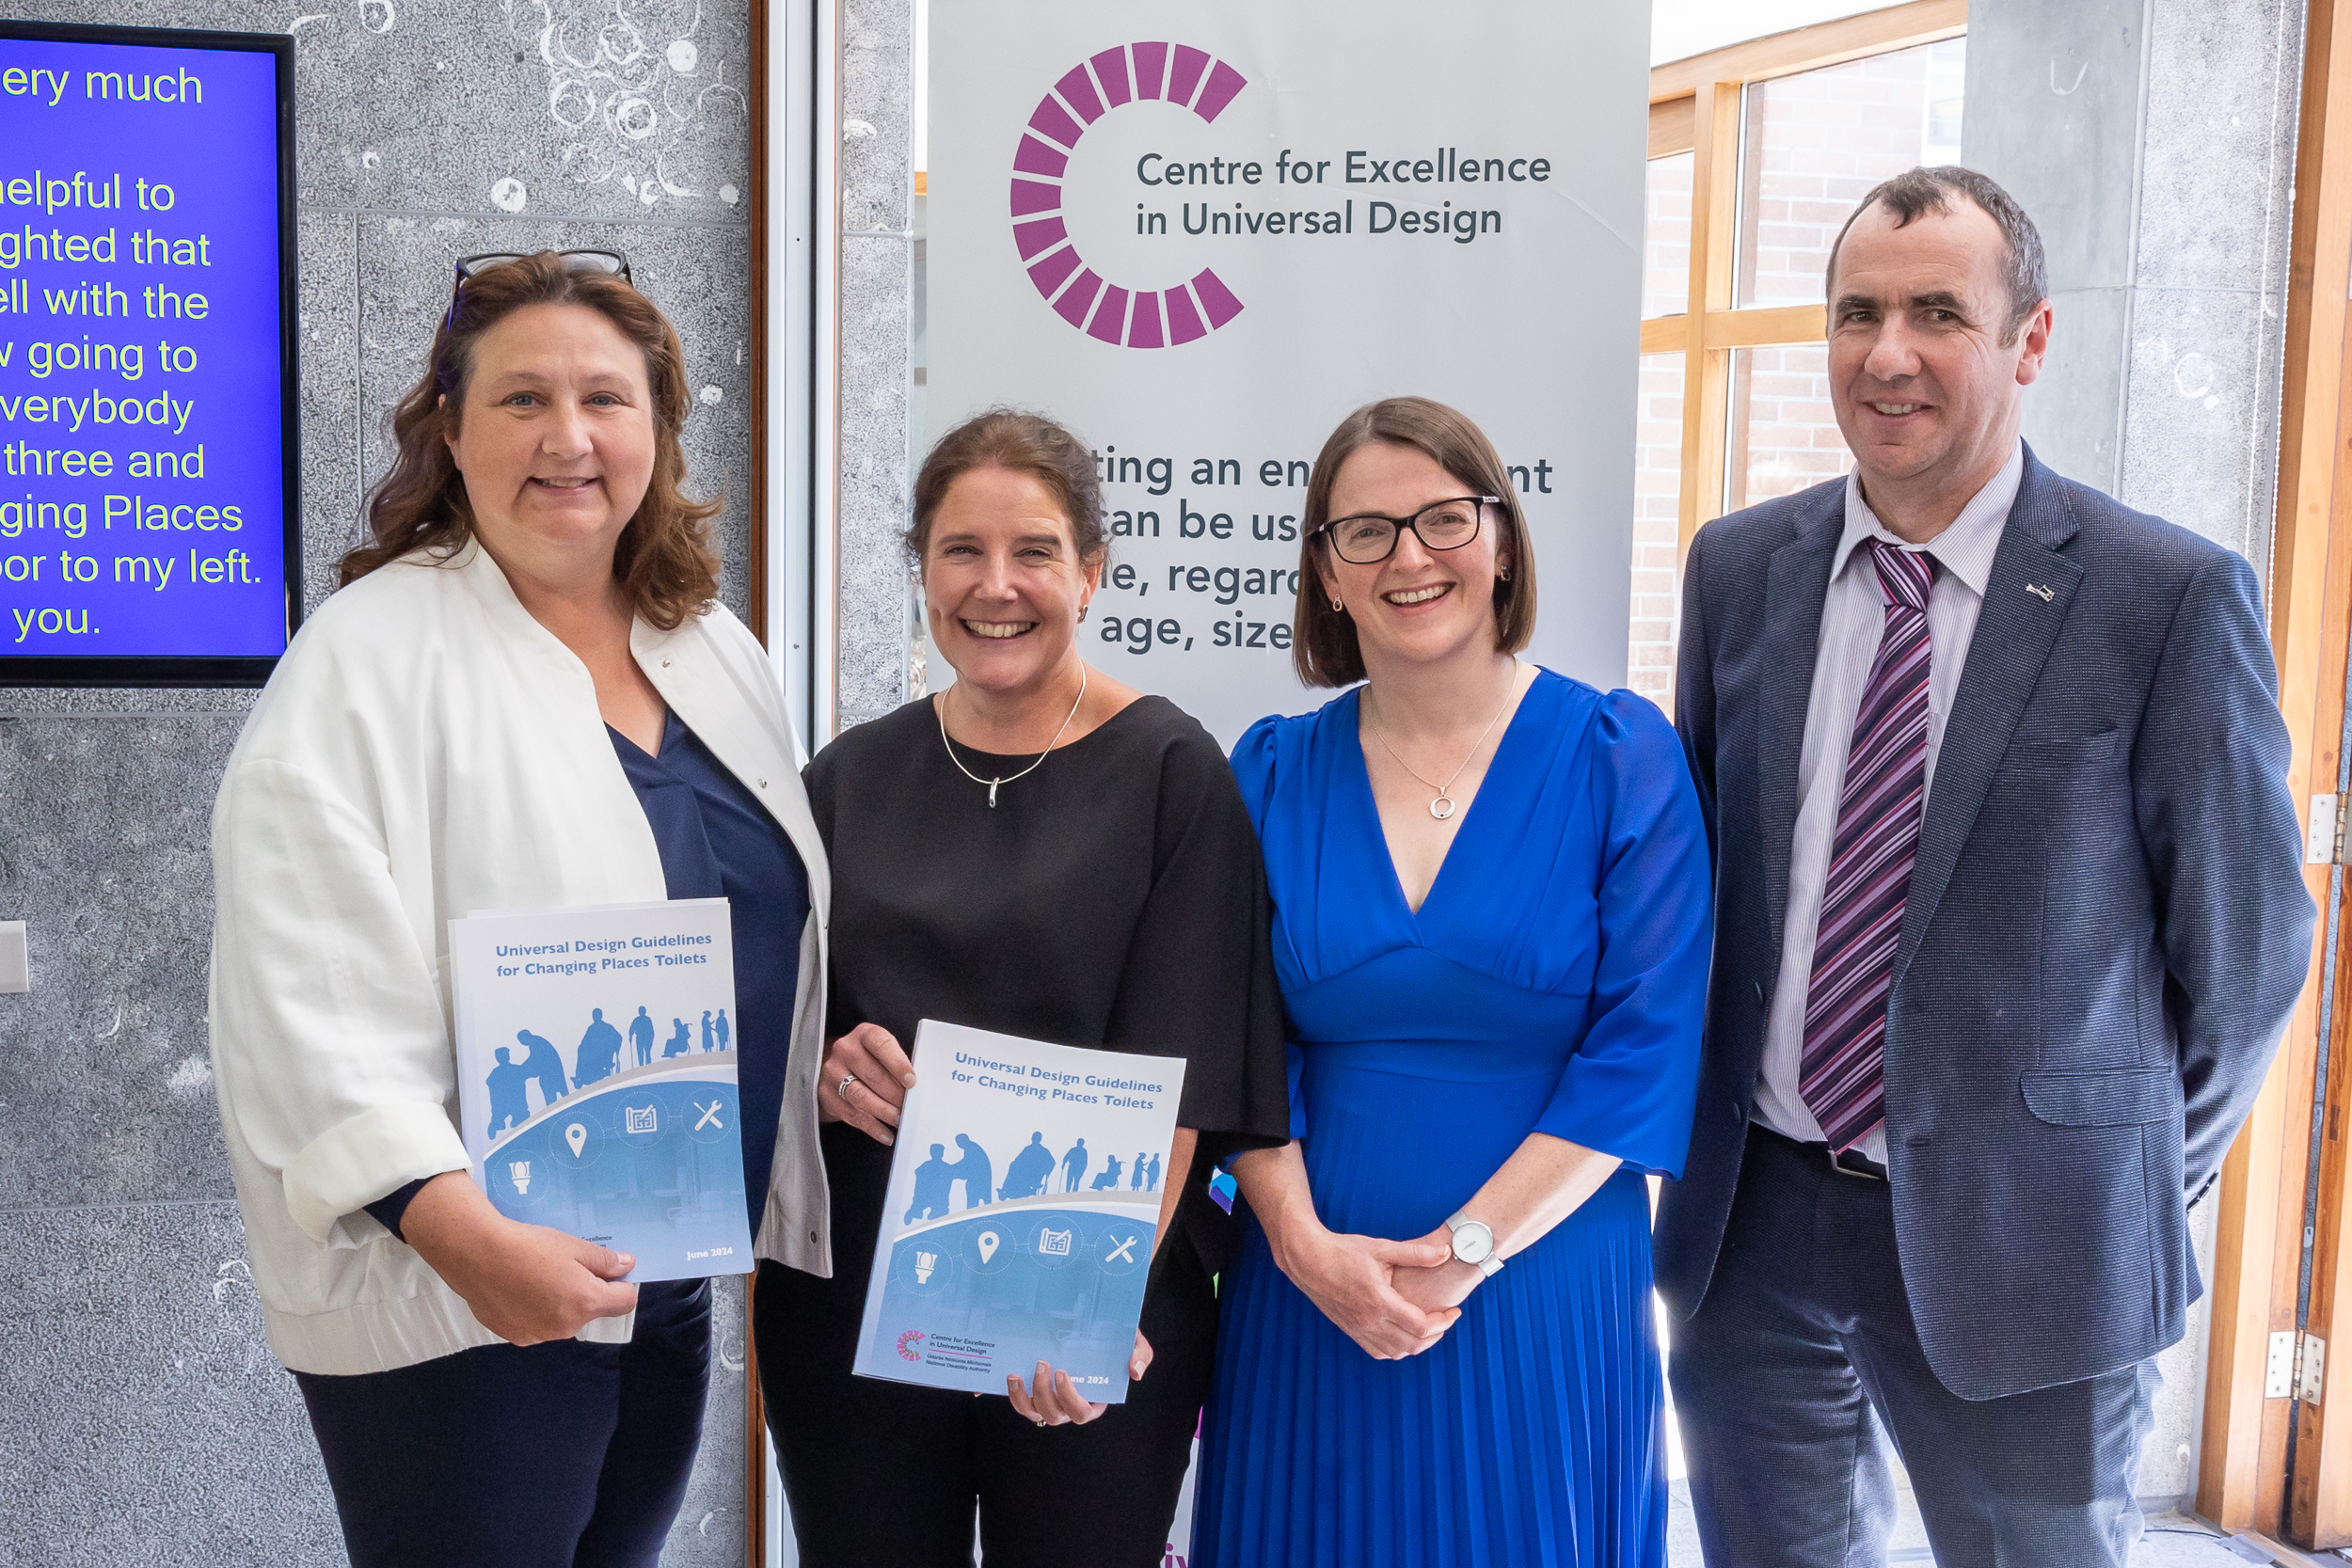 Picture of Anne Rabbitte T.D., Aideen Hartney, Ruth O’Reilly, and Paul McDermott. Anne Rabbitte and Aideen Hartney are holding copies of the new guidelines and they are all standing in front of a Centre for Excellence in Universal Design Banner.